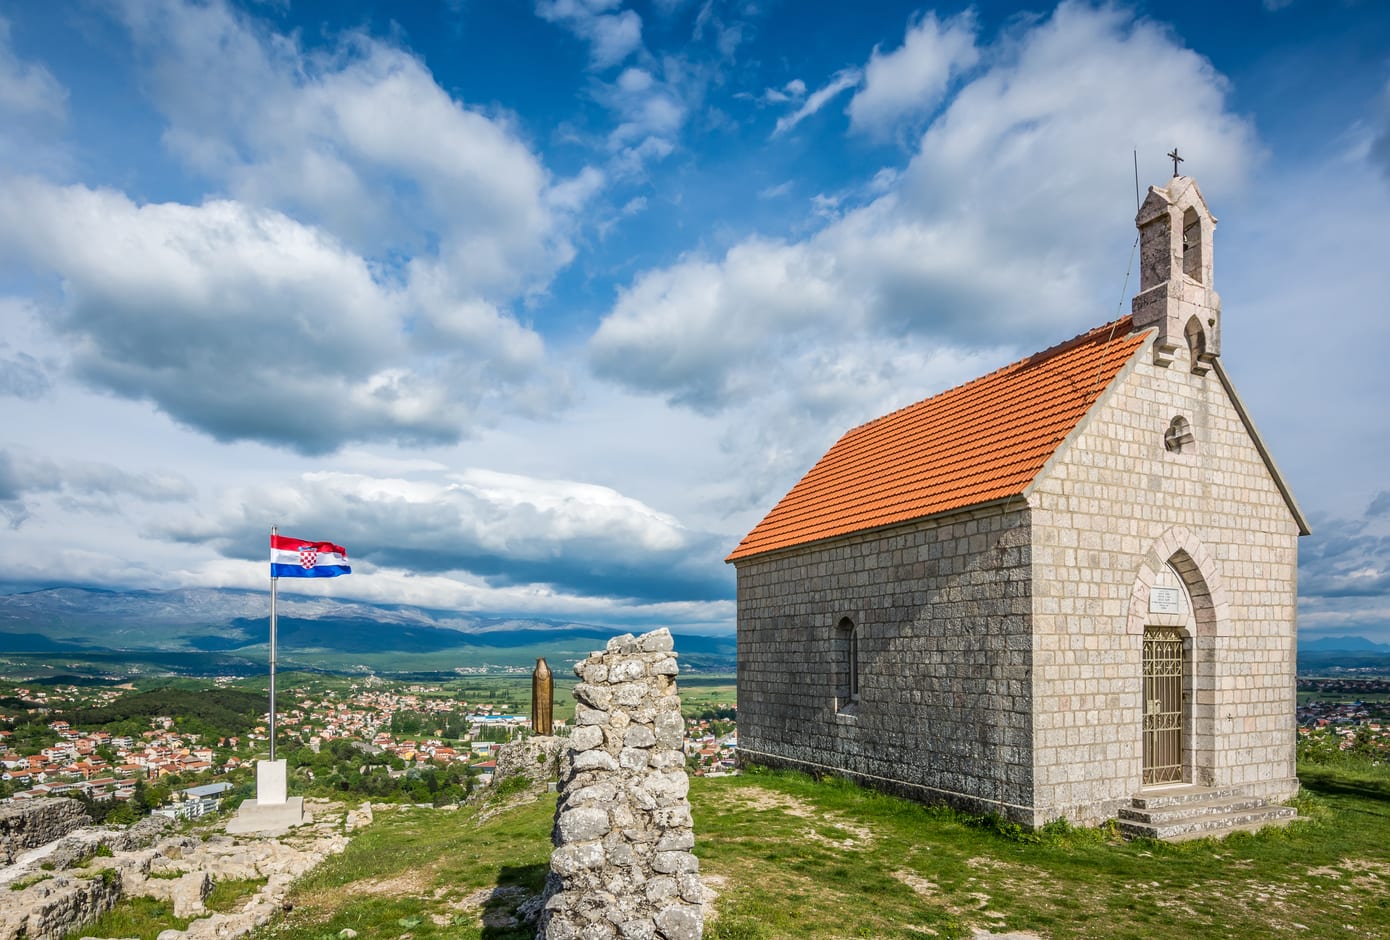 The chapel above the town of Sinj, in Croatia
